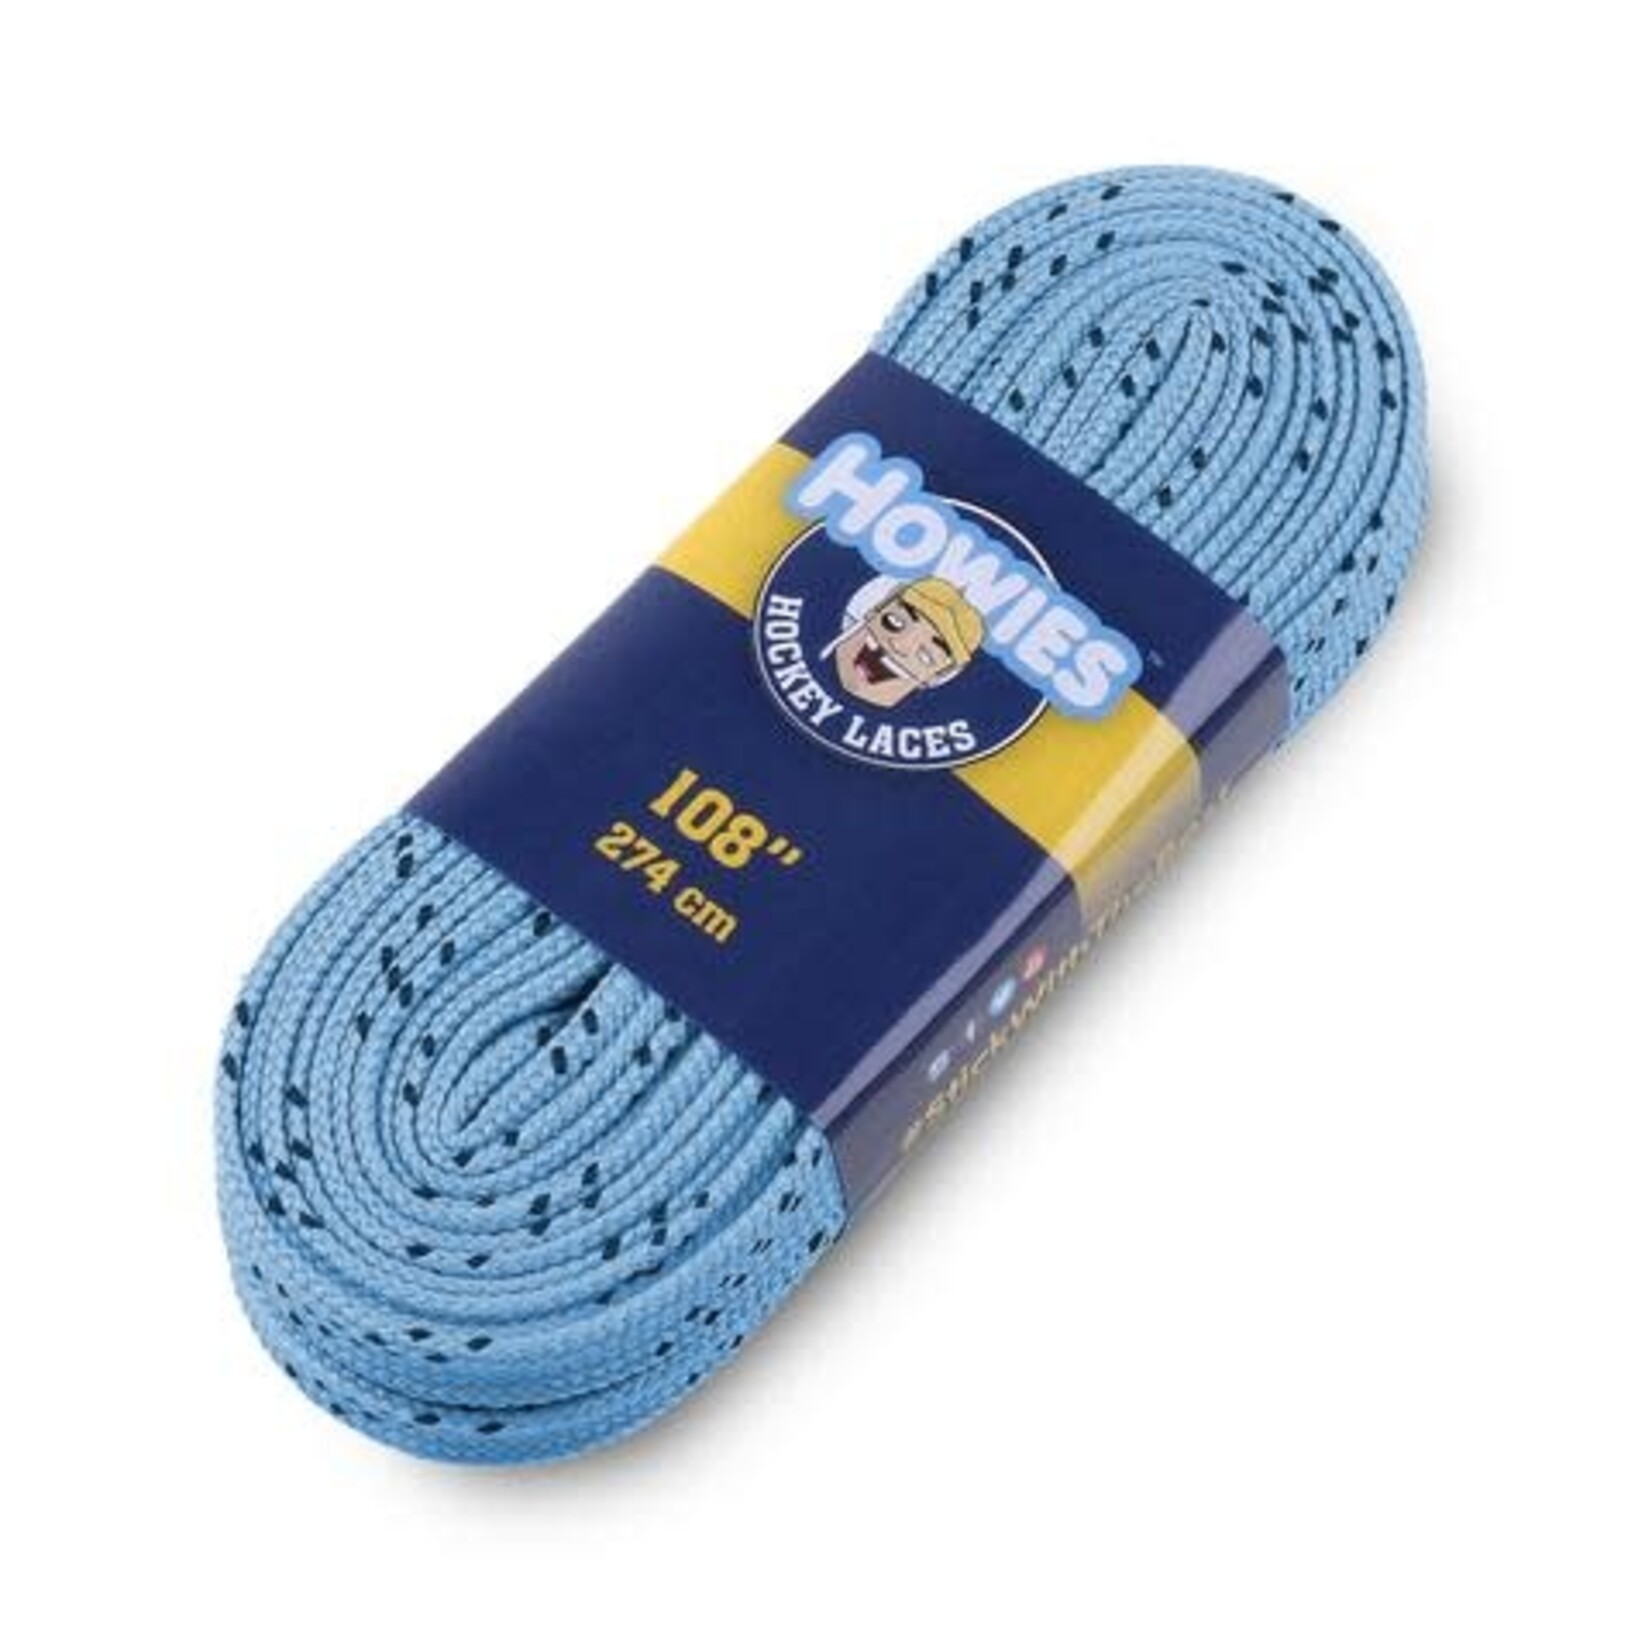 Howies White Cloth Hockey Skate Laces